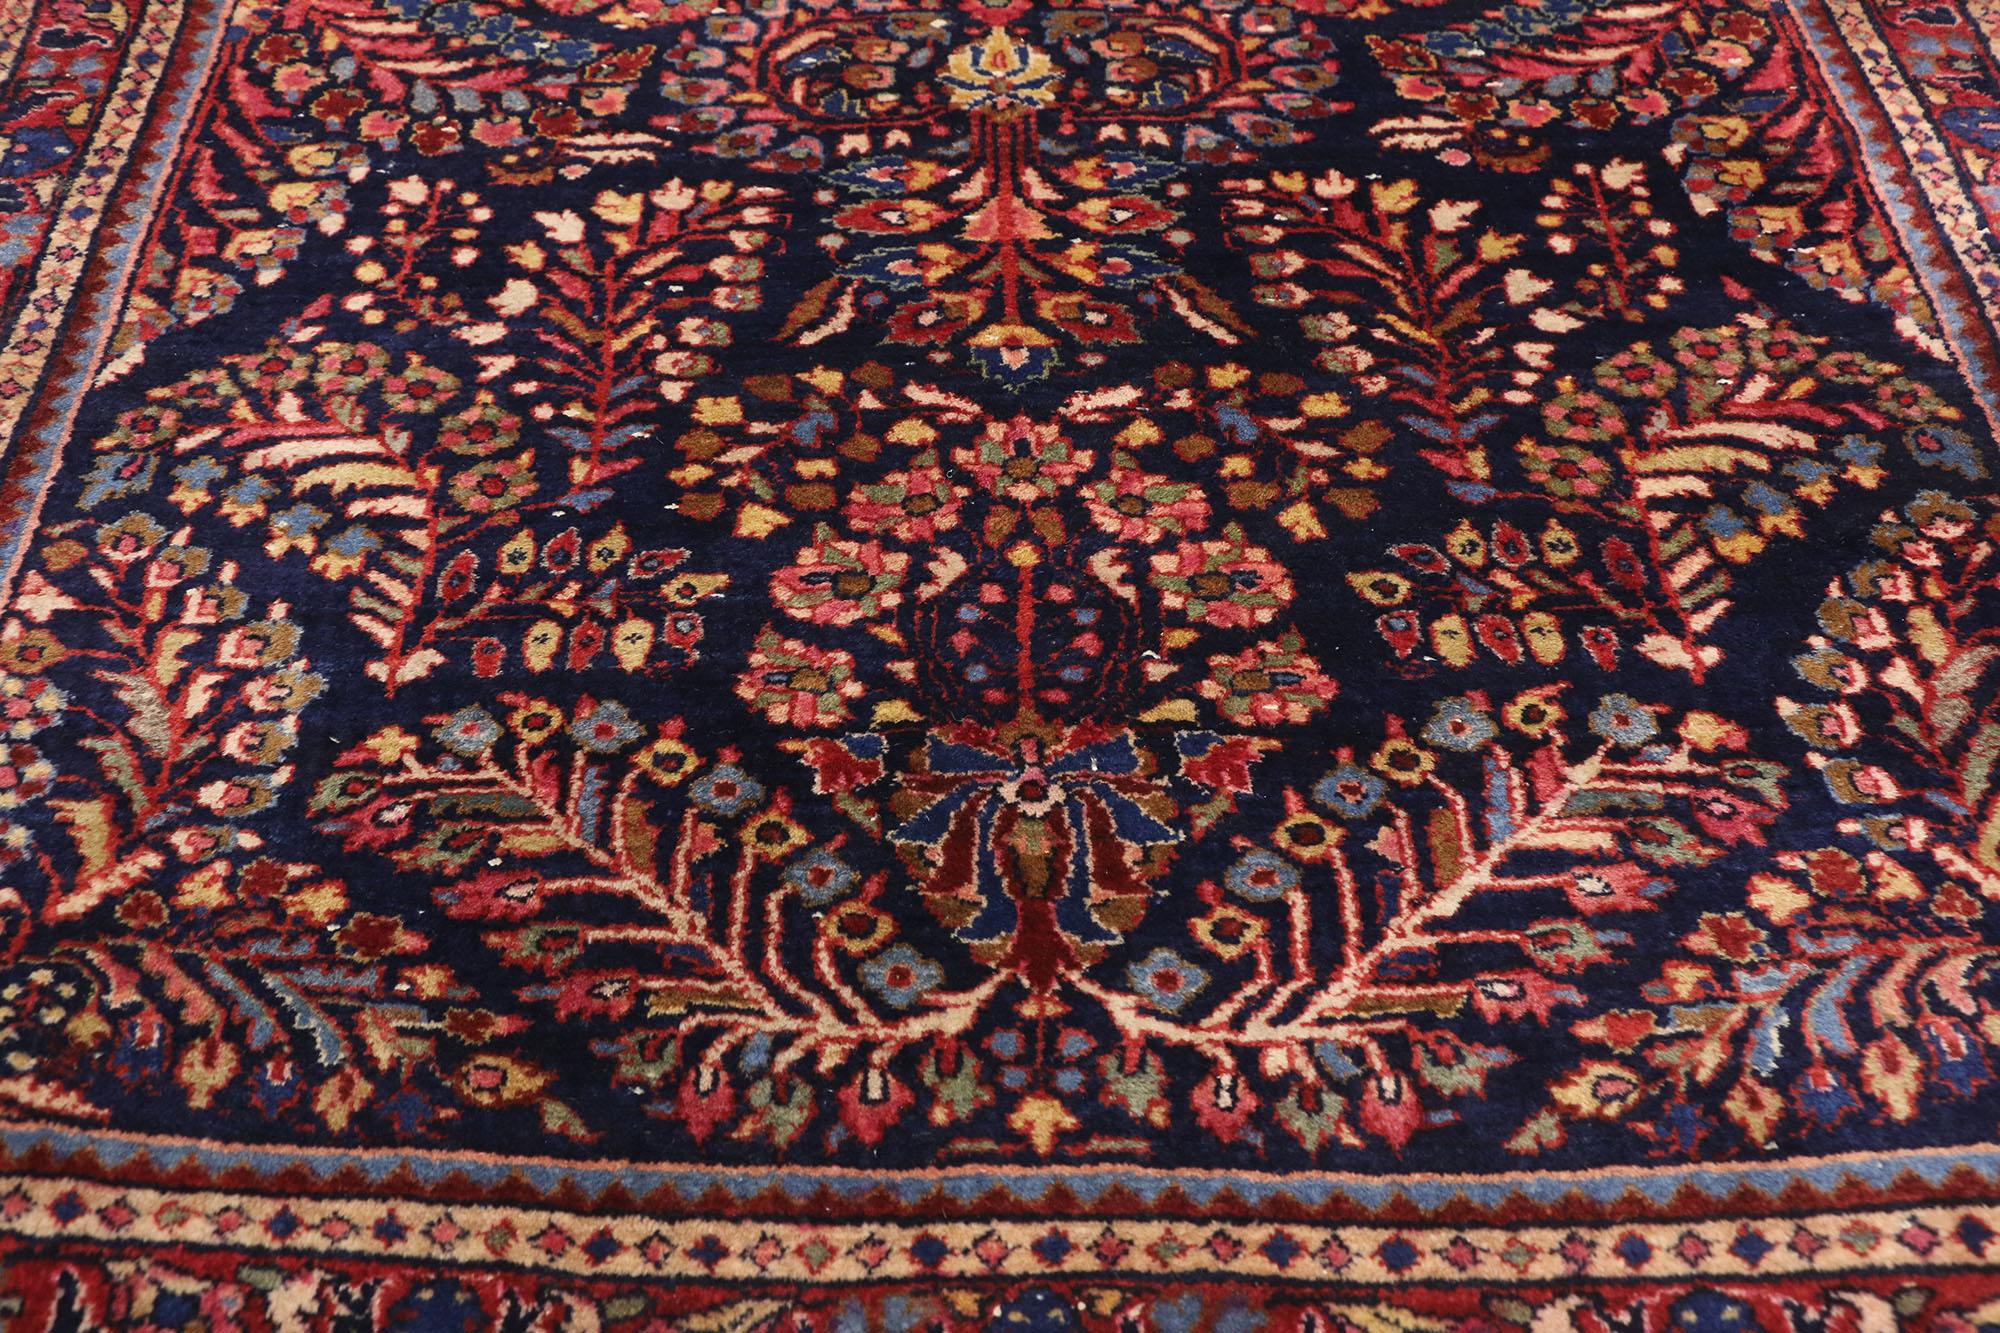 Hand-Knotted Antique Persian Sarouk Rug with Luxe Victorian Style, Scatter Rug